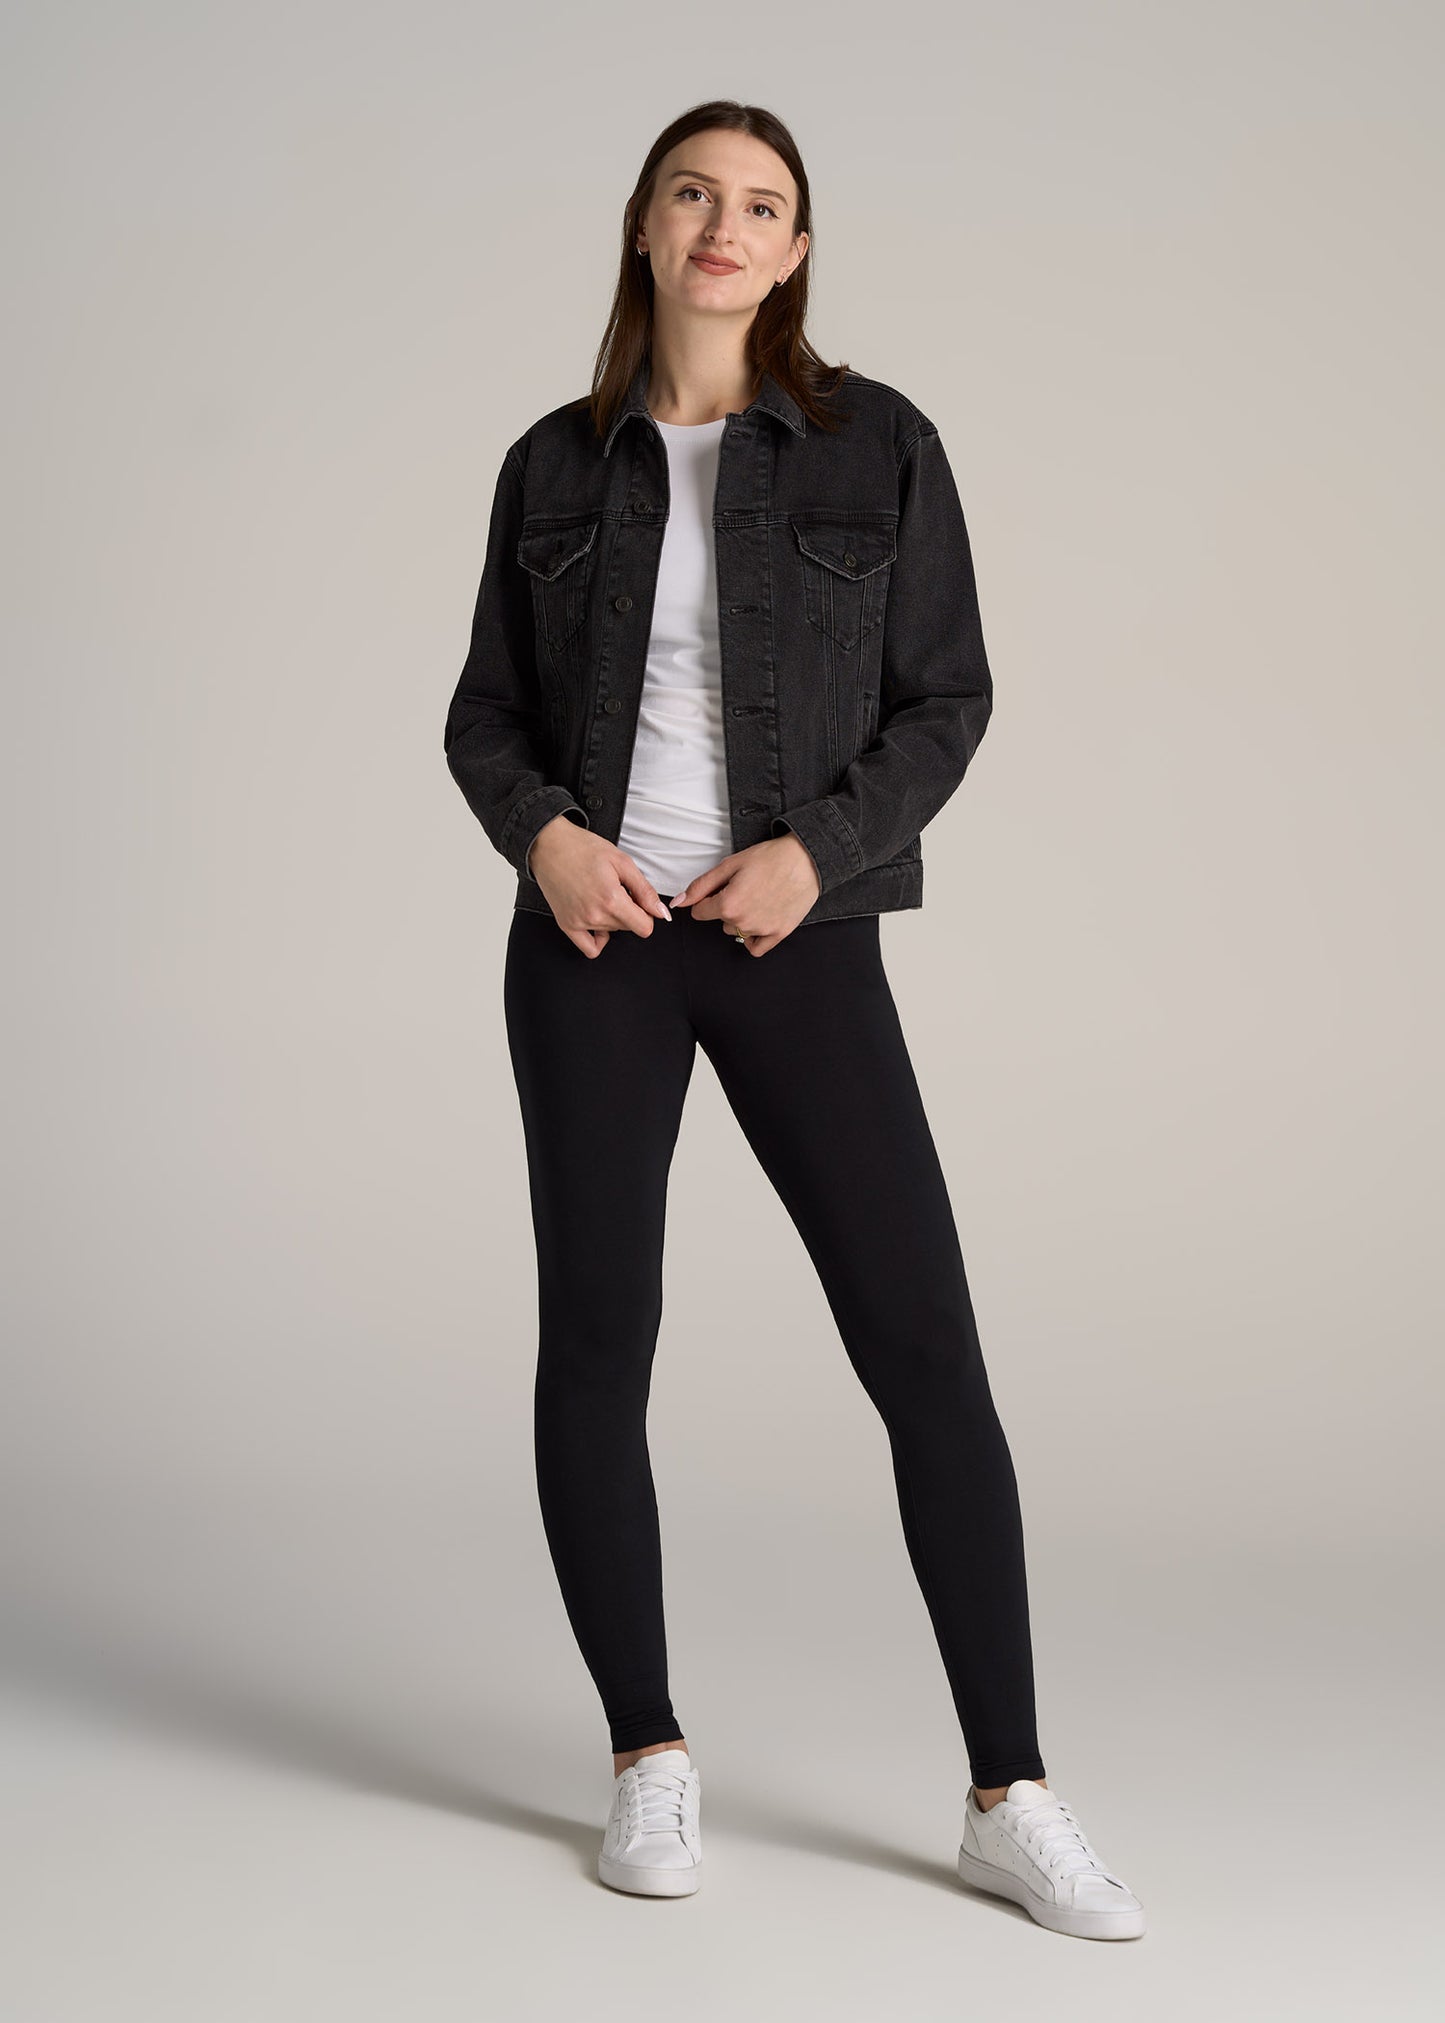 A tall woman wearing a black jean jacket and black cotton leggings.